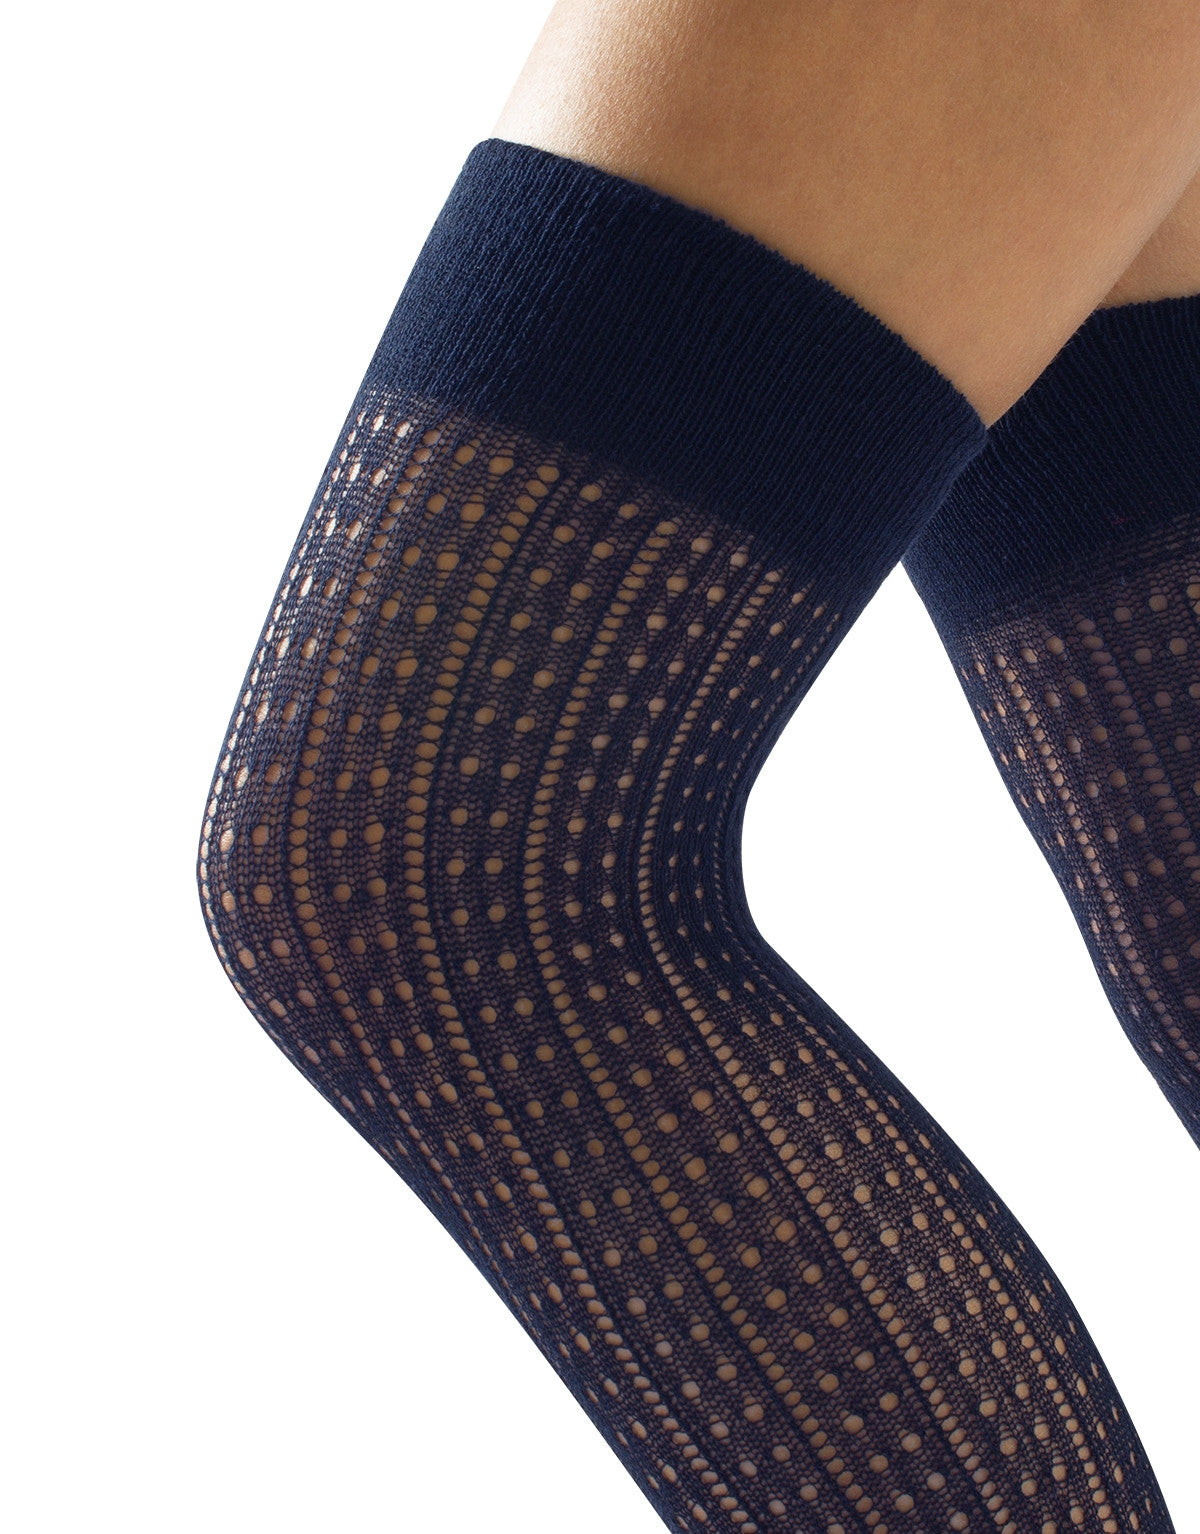 Calzitaly Geometric Over-Knee Socks - Knitted navy blue over the knee socks with an openwork spotted vertical rib style pattern, plain elasticated cuff and plain toe.